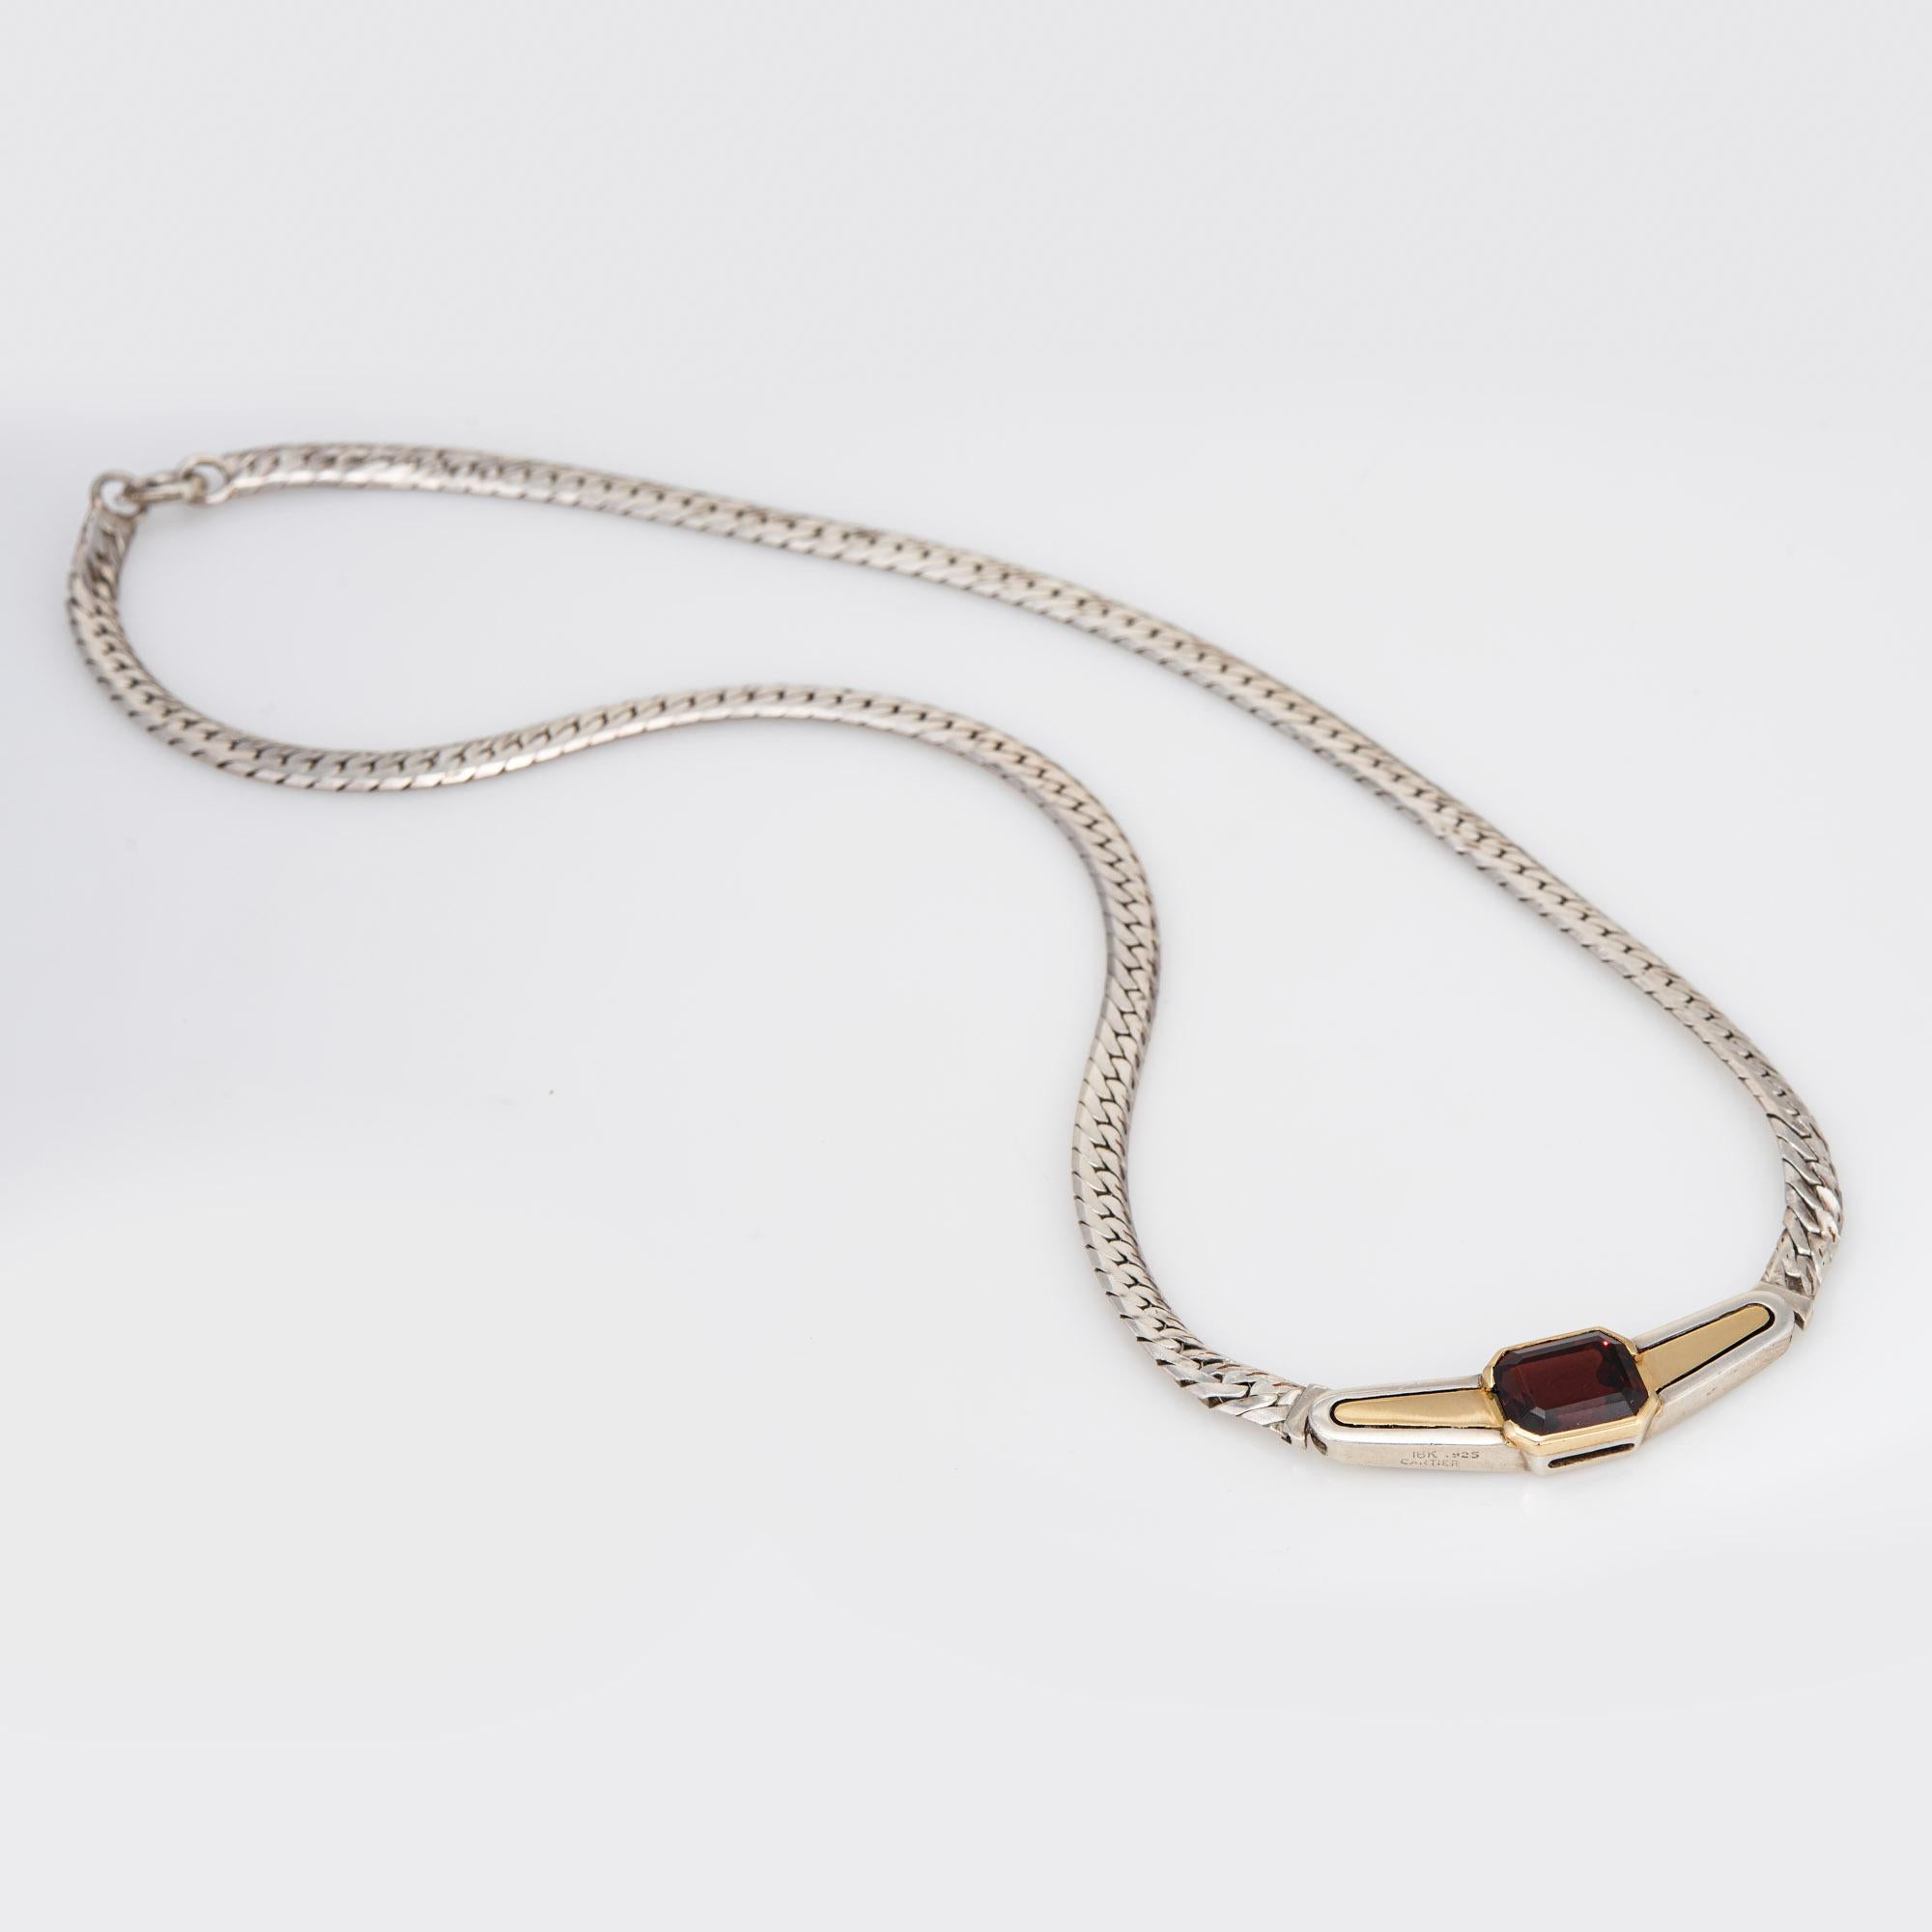 Stylish vintage Cartier garnet necklace crafted in sterling silver and 18 karat yellow gold (circa 1970s).  

One garnets measures 10mm x 7.5mm. The garnet is in very good condition and free of cracks or chips.
Designed in the Art Deco style, the